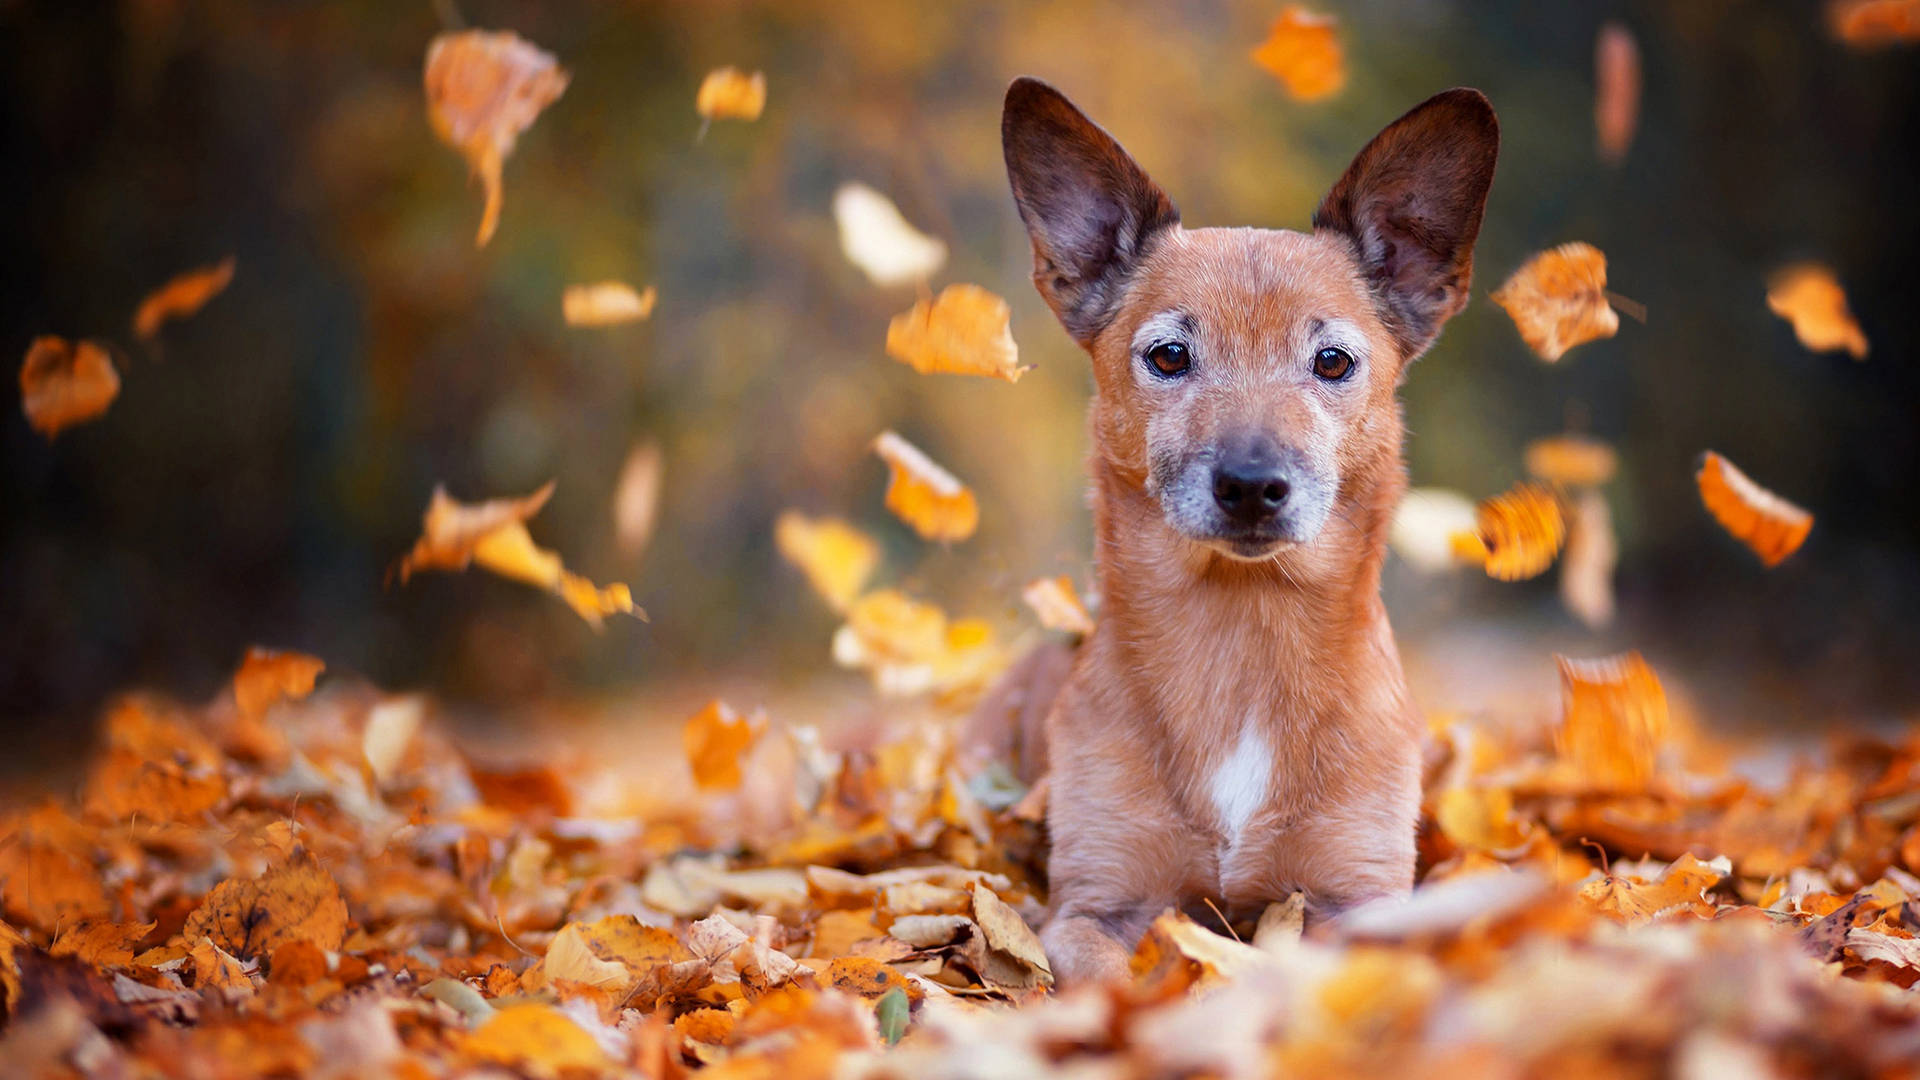 Cute Red Dog On Autumn Leaves Background